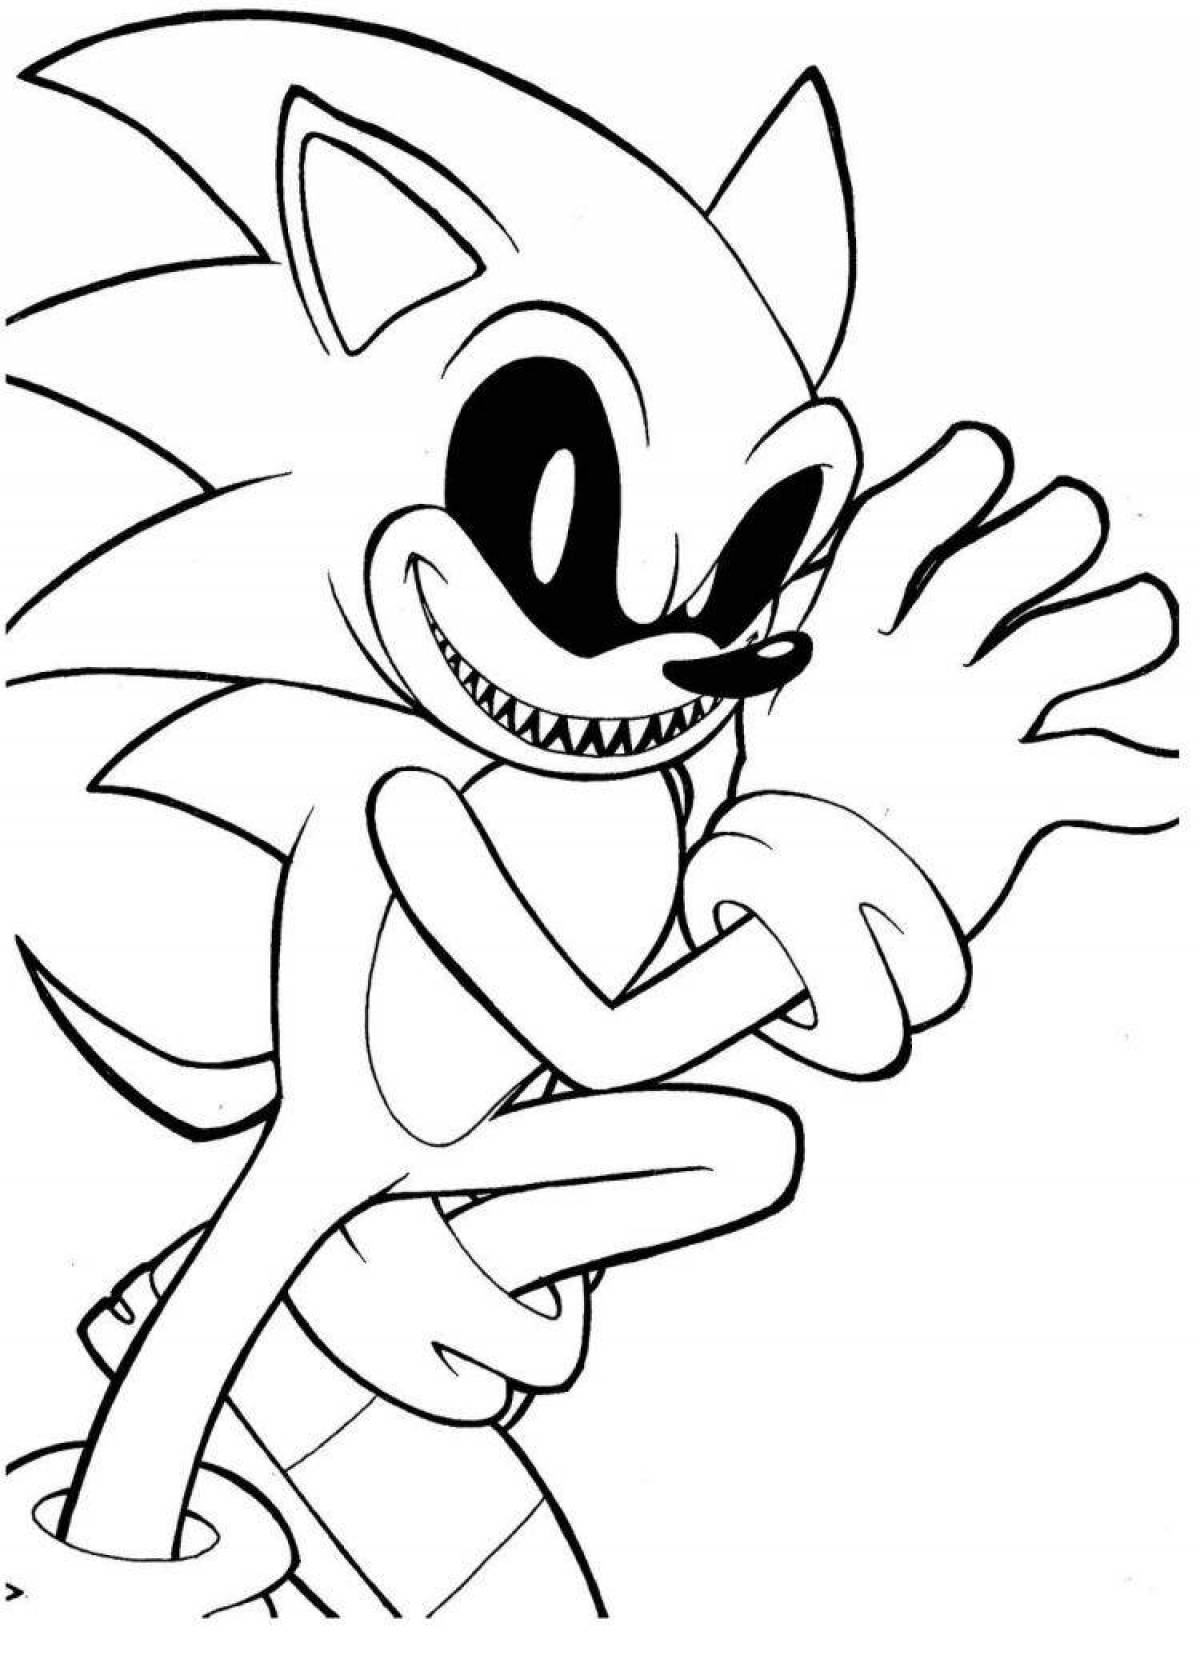 Charming sonic x coloring book